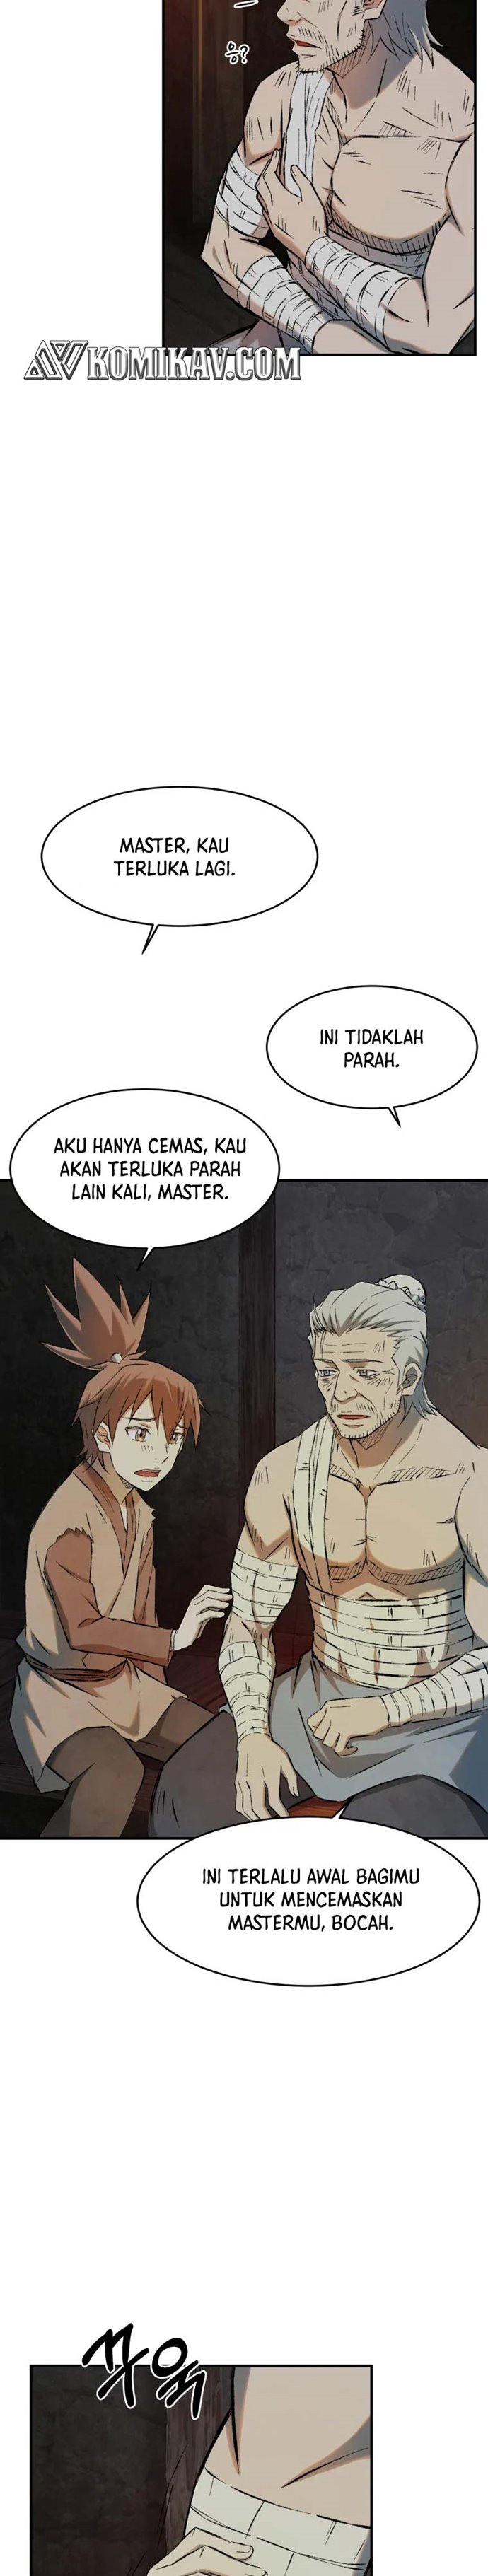 The Great Master Chapter 9